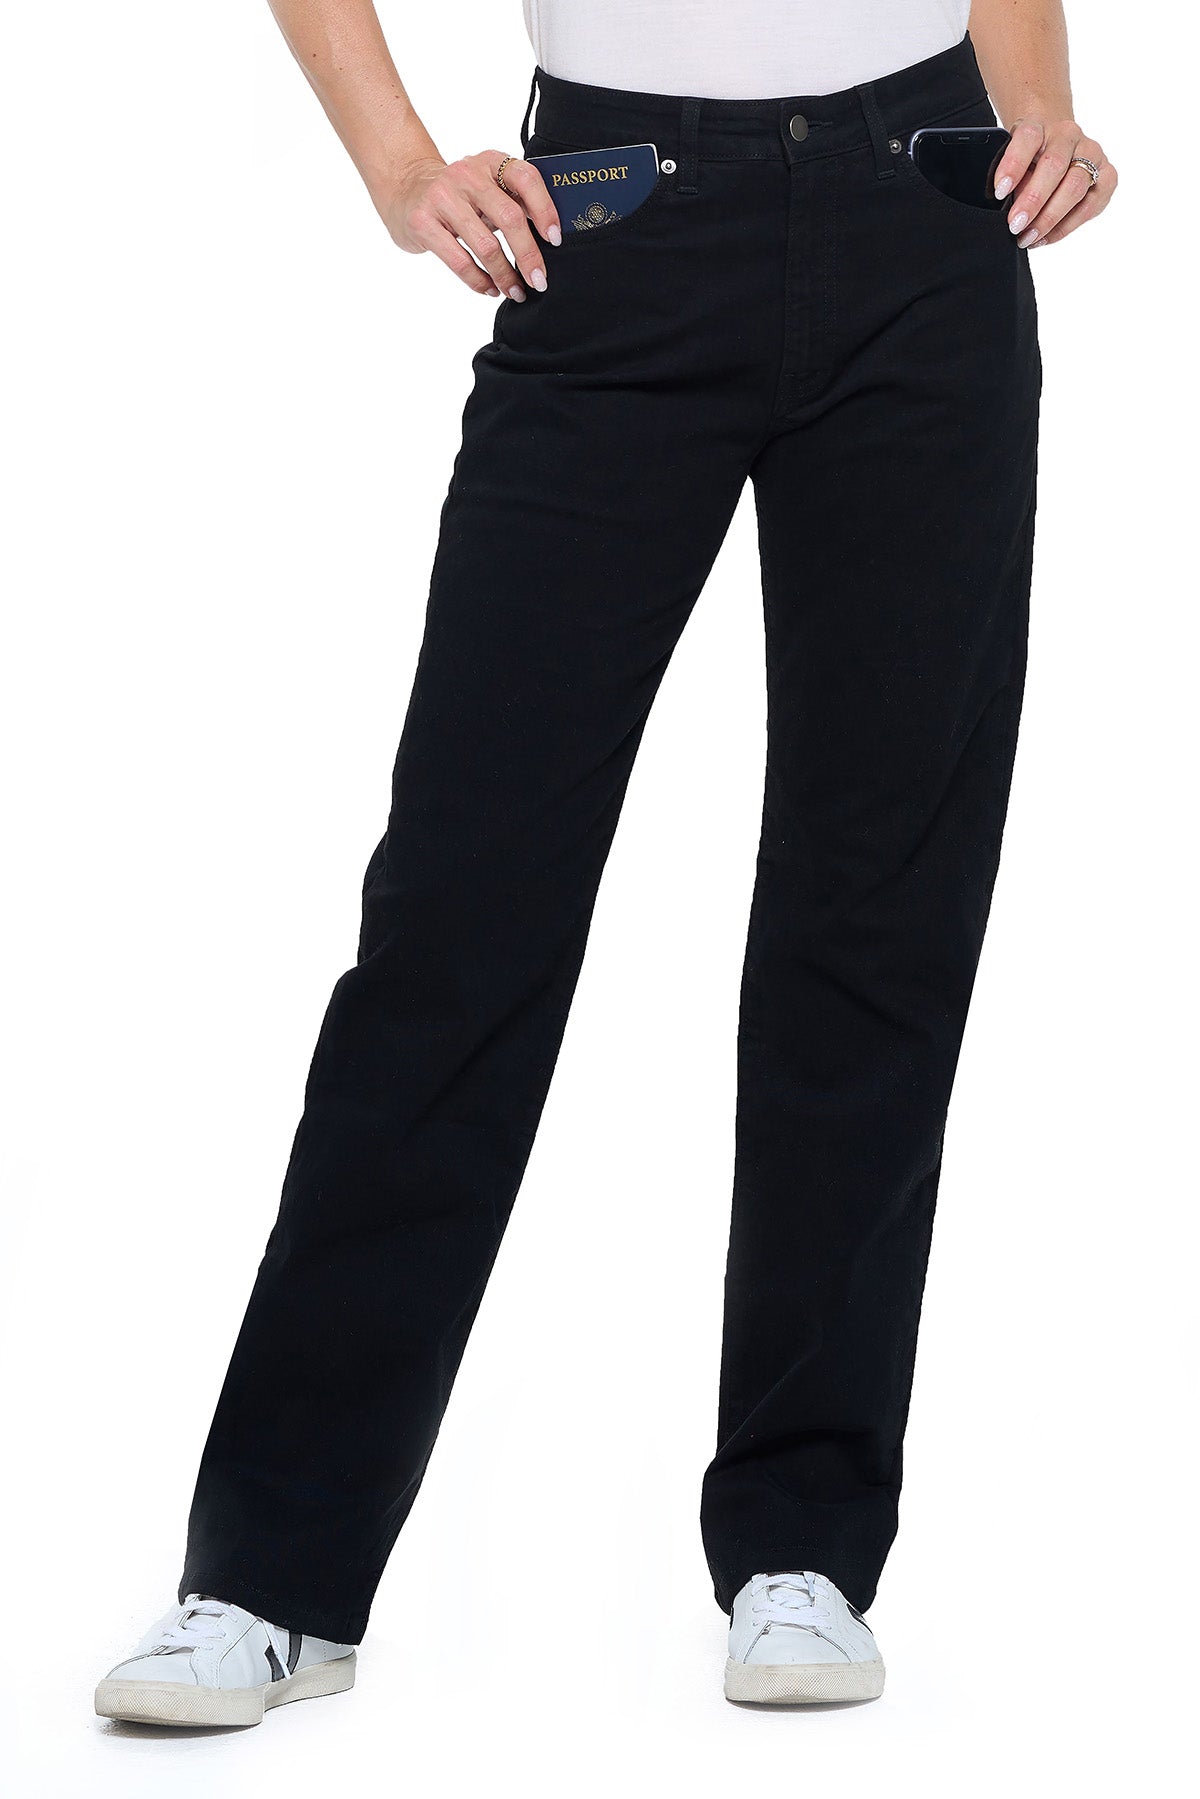 Order High Waist Straight Tailored Korean Pants Online From MY OWN